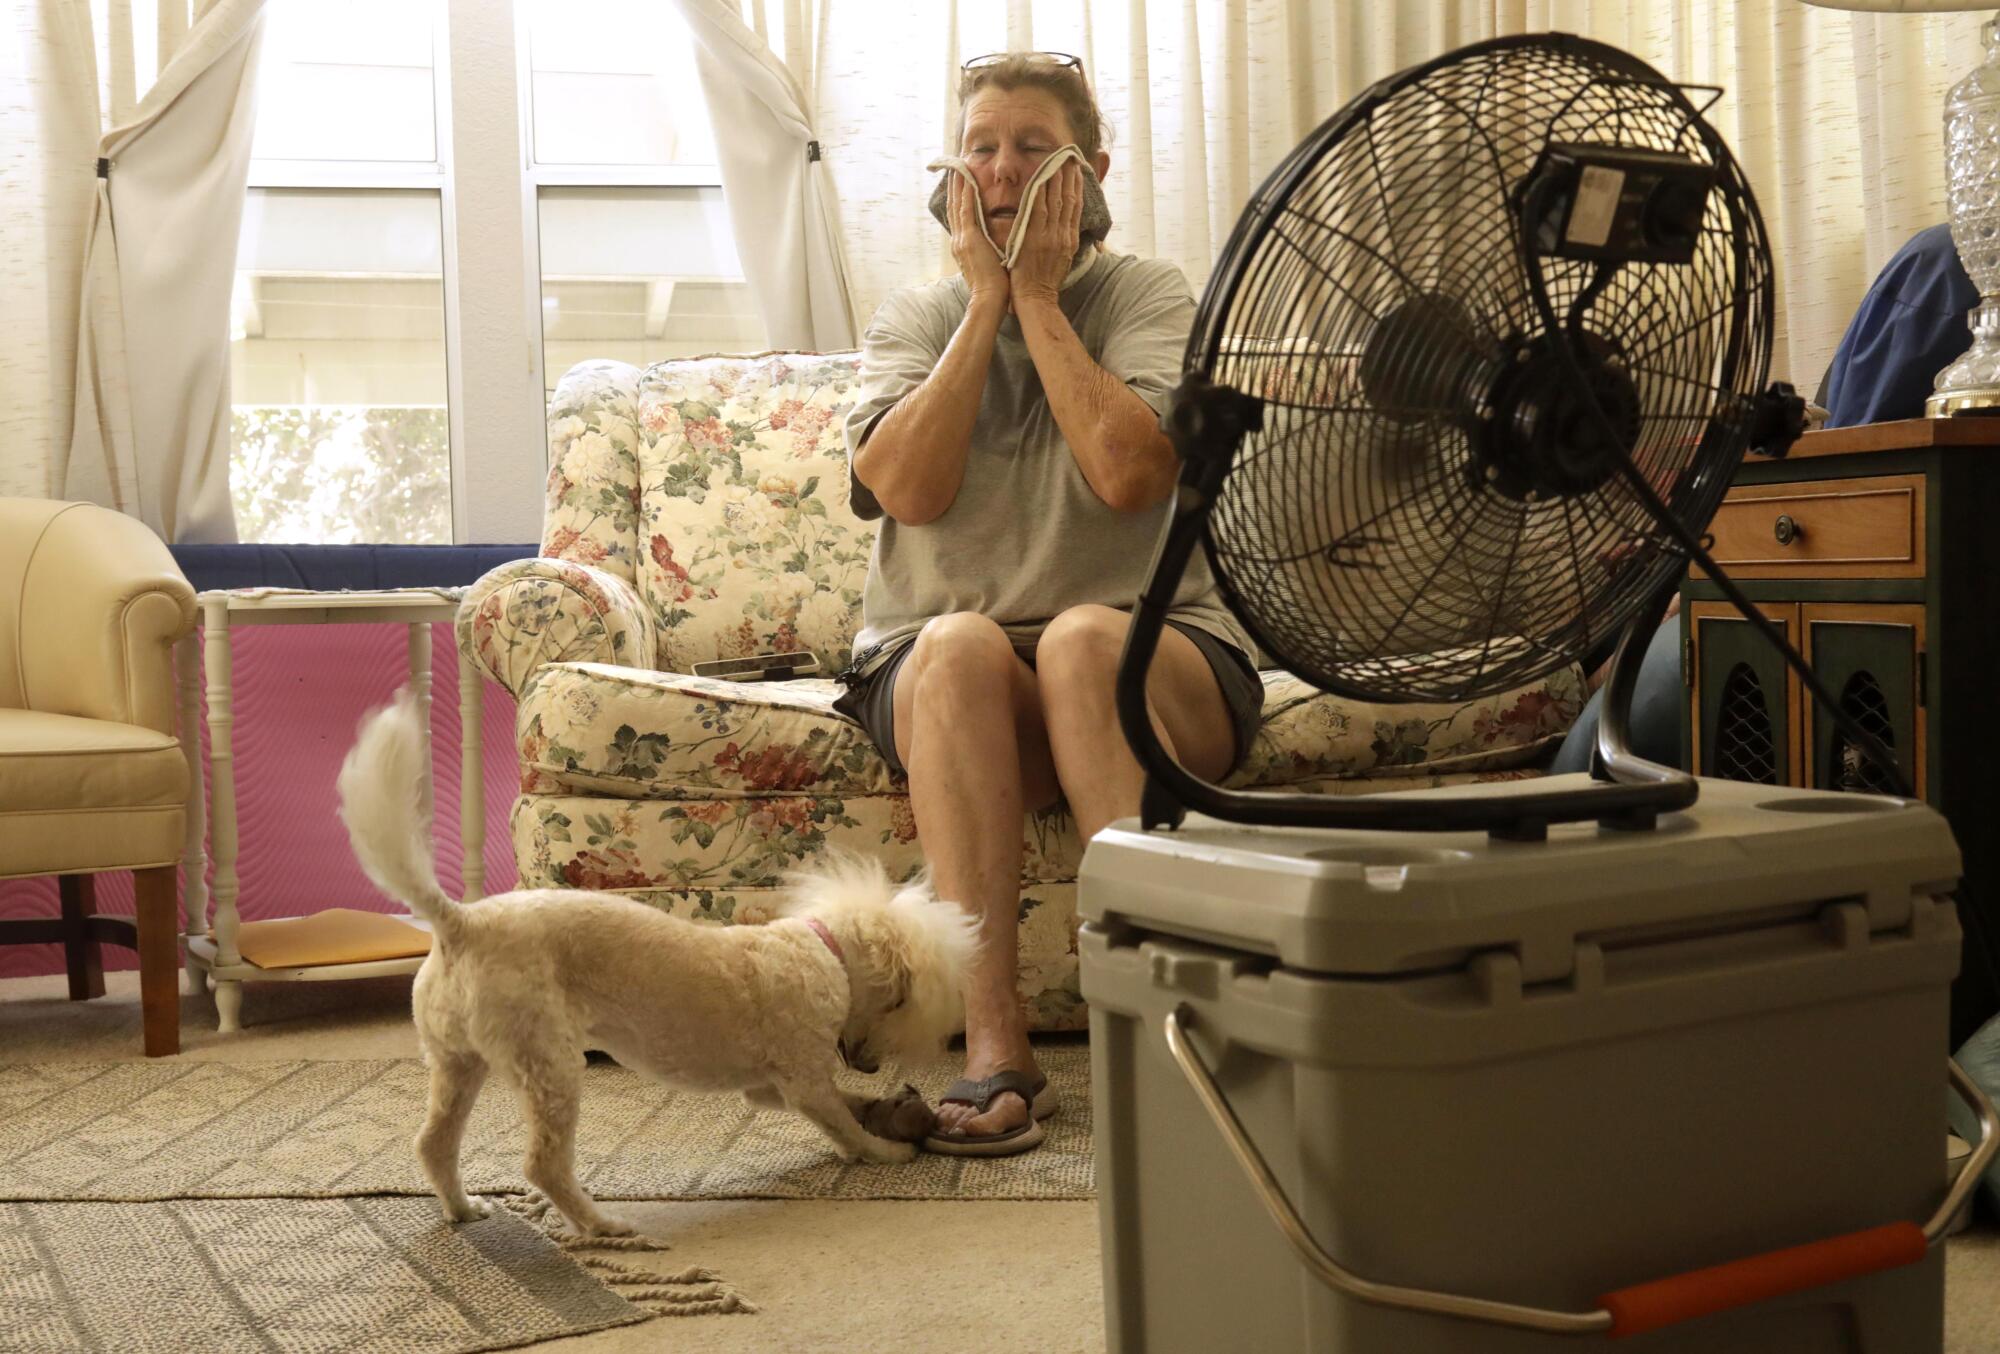 Diane McLindon and her dog Frankie try to stay cool in their trailer in Desert Hot Springs.